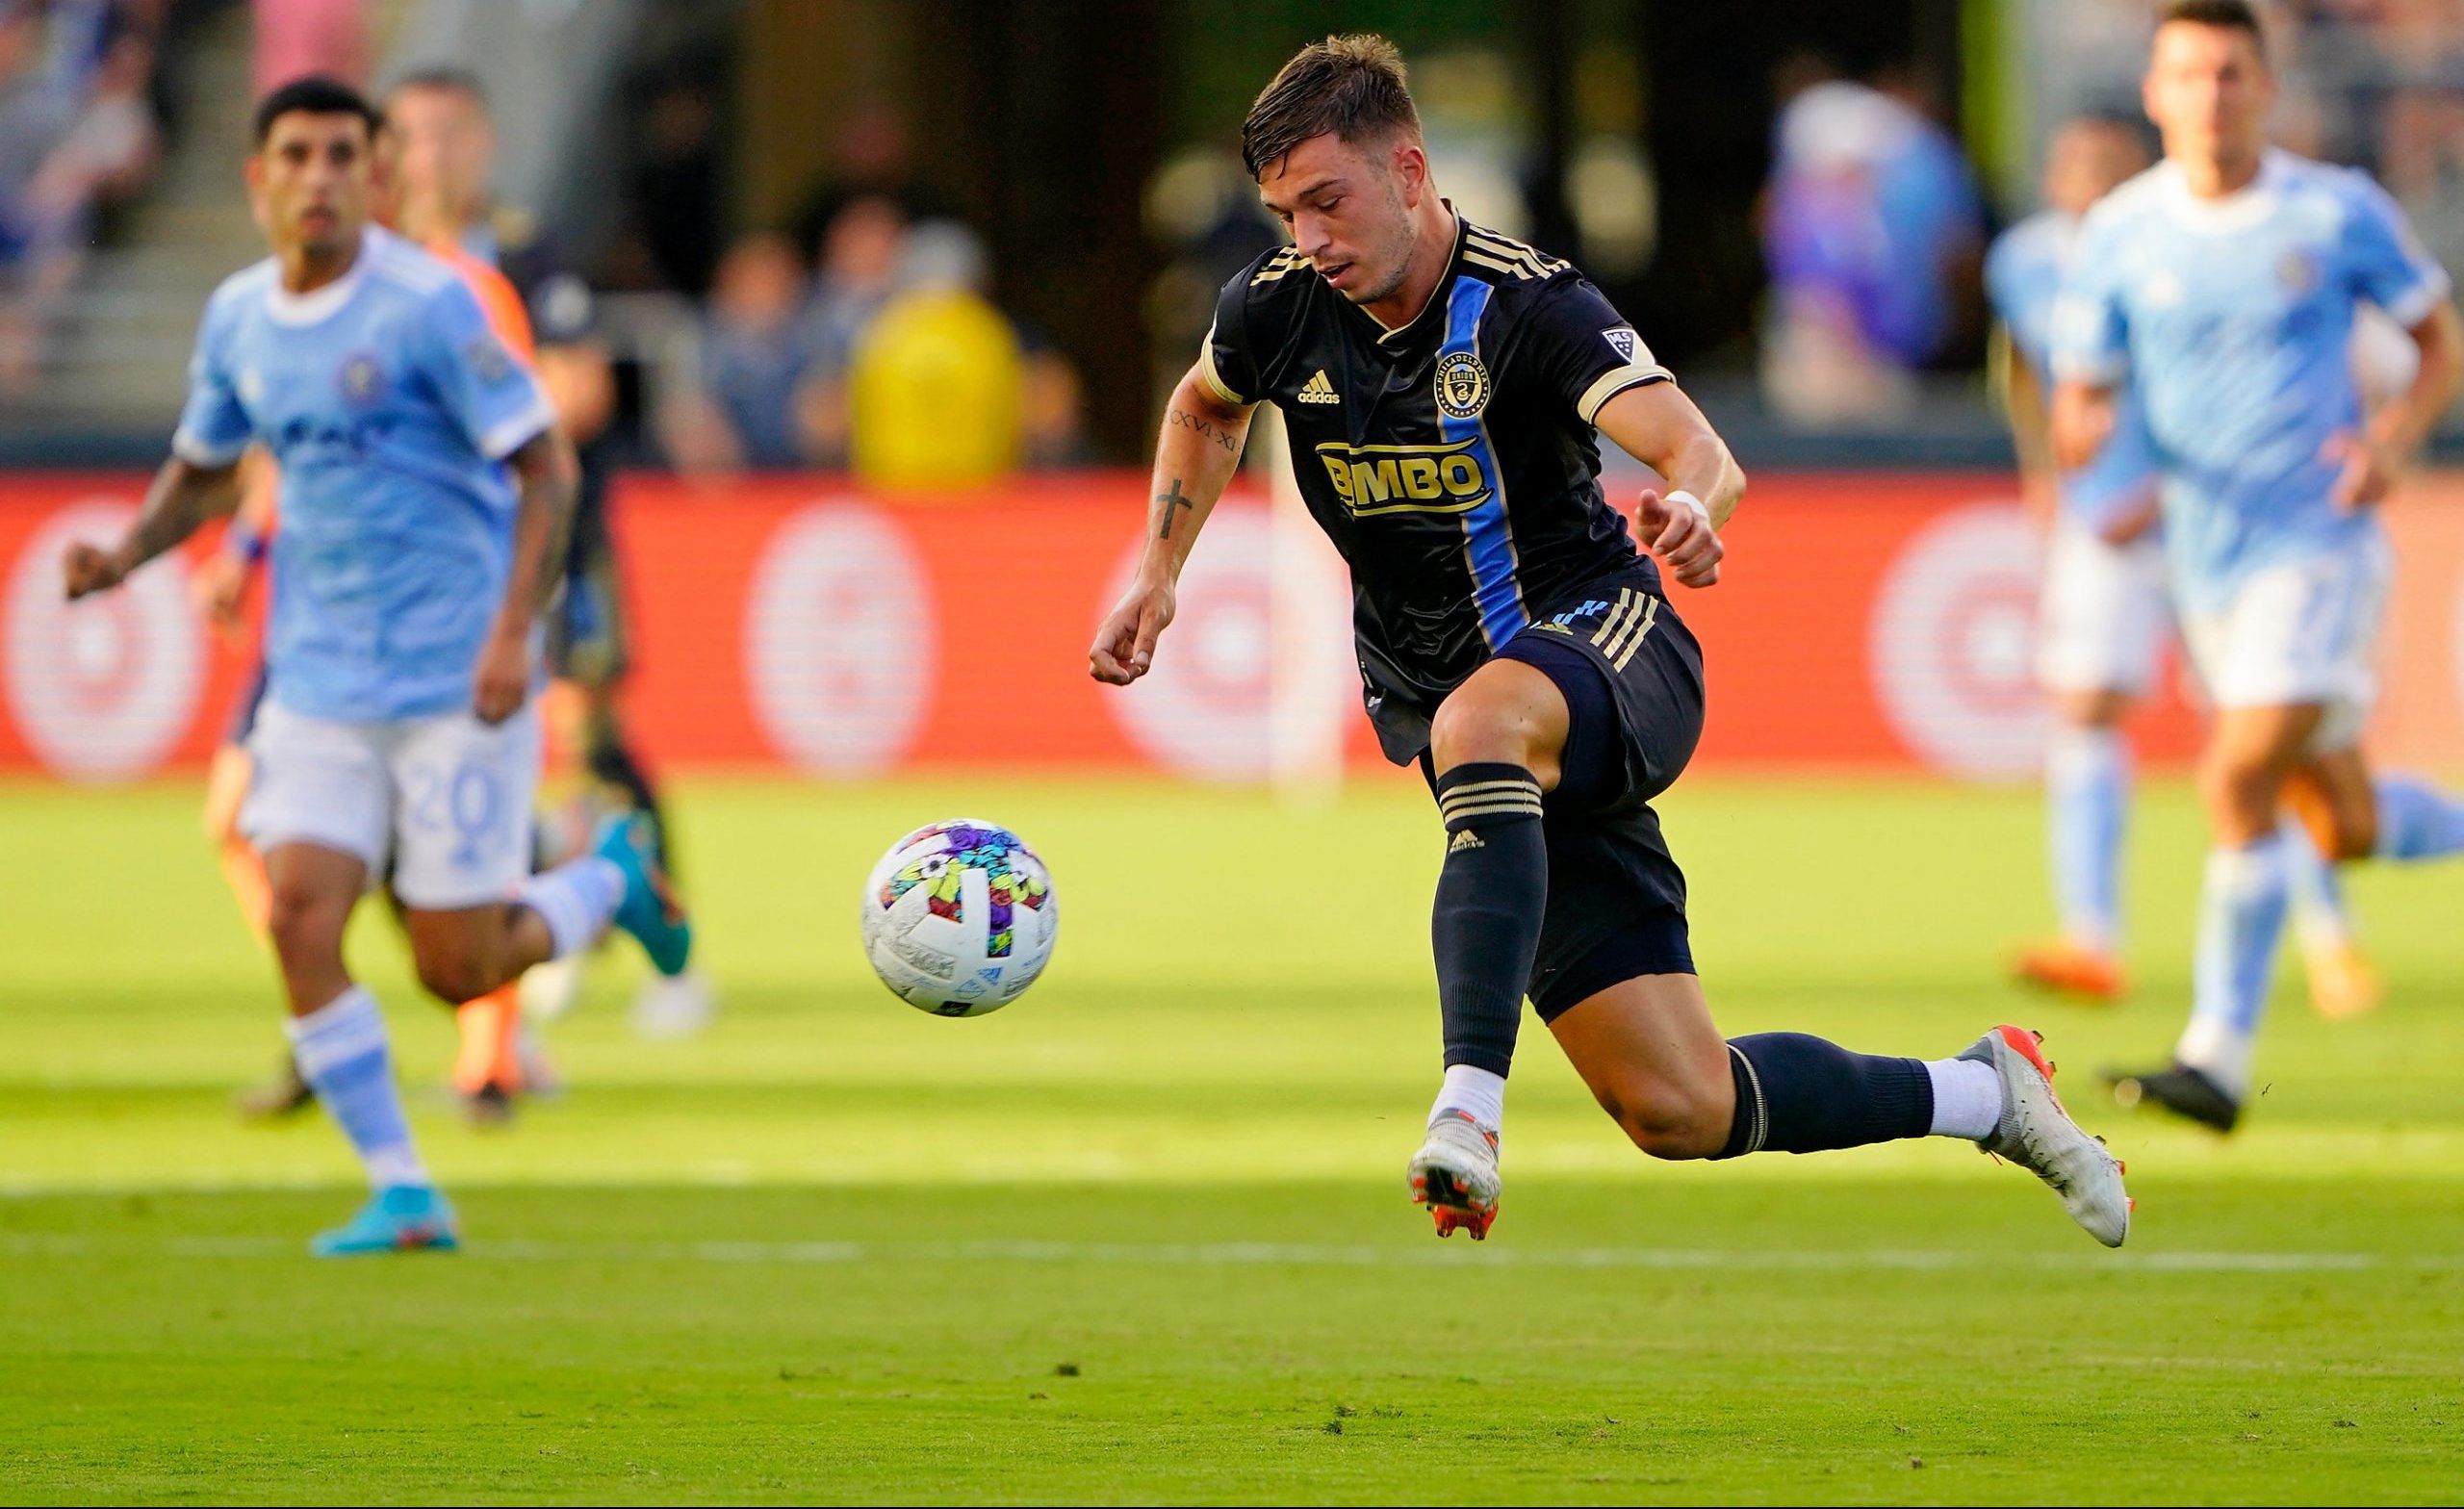 Jun 26, 2022; Philadelphia, Pennsylvania, USA; Philadelphia Union defender Kai Wagner (27) makes a play for the ball against New York City FC during the second half at Subaru Park. Mandatory Credit: Gregory Fisher-USA TODAY Sports